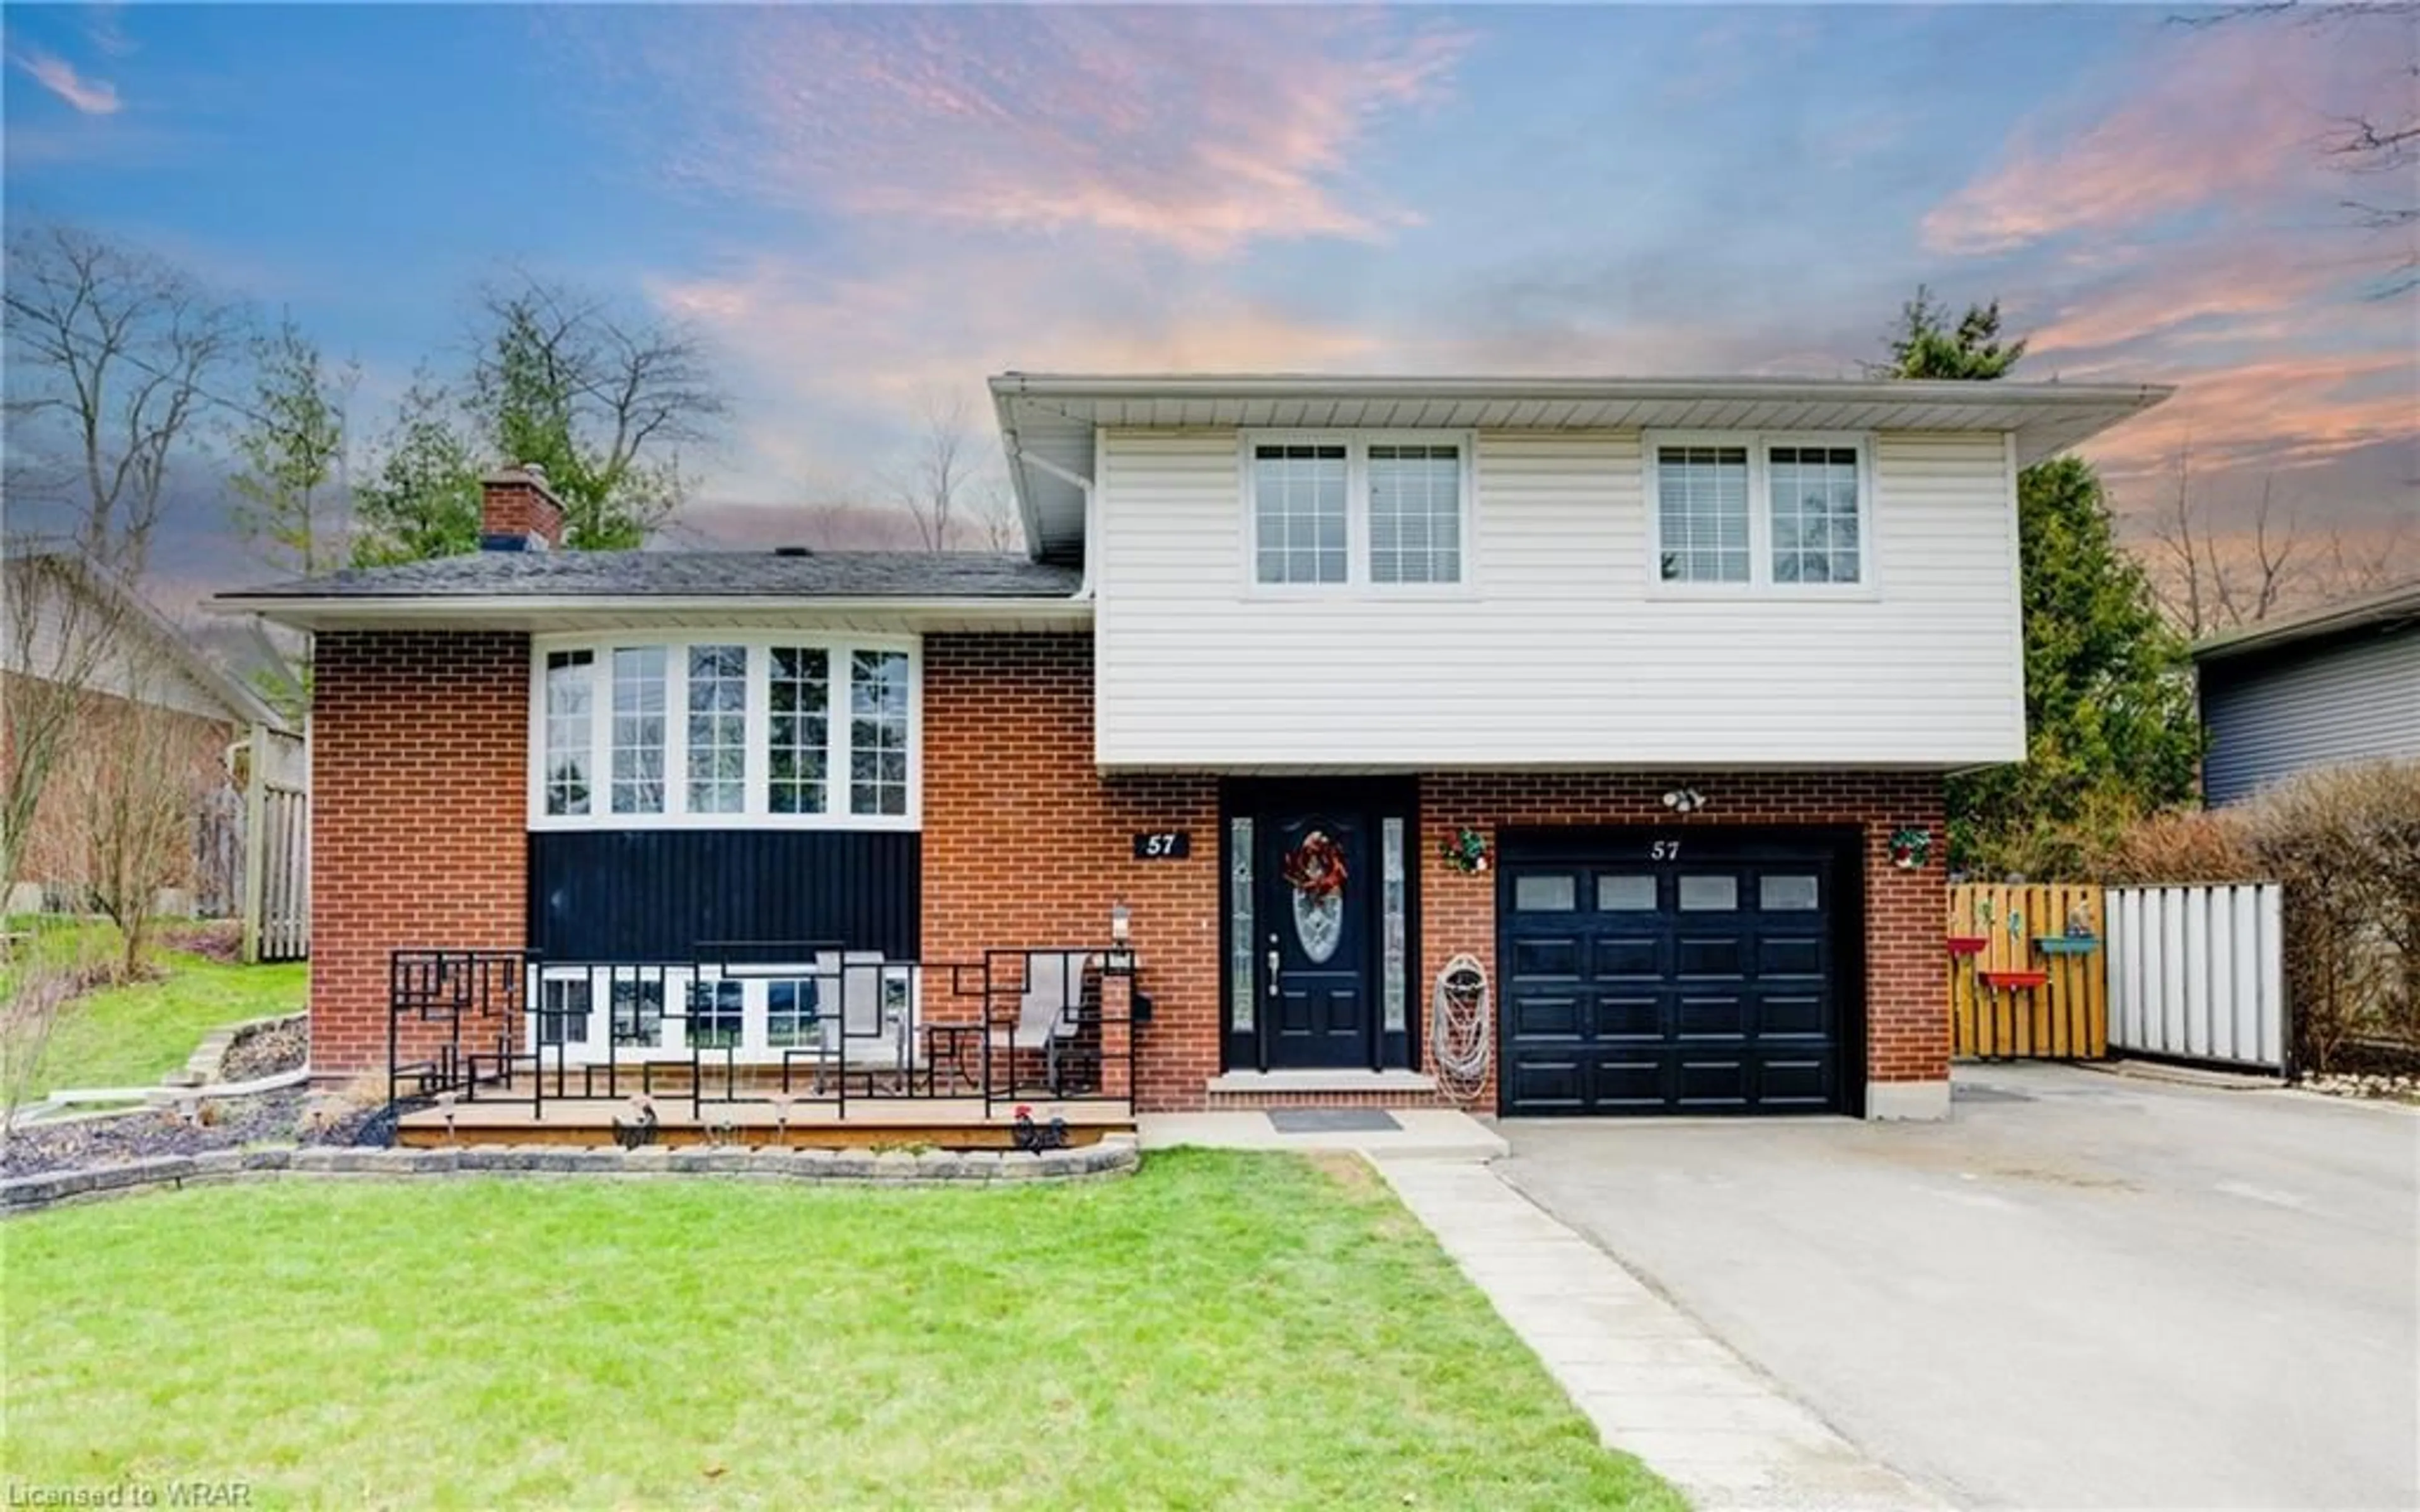 Home with brick exterior material for 57 Larkspur Cres, Kitchener Ontario N2M 4W8